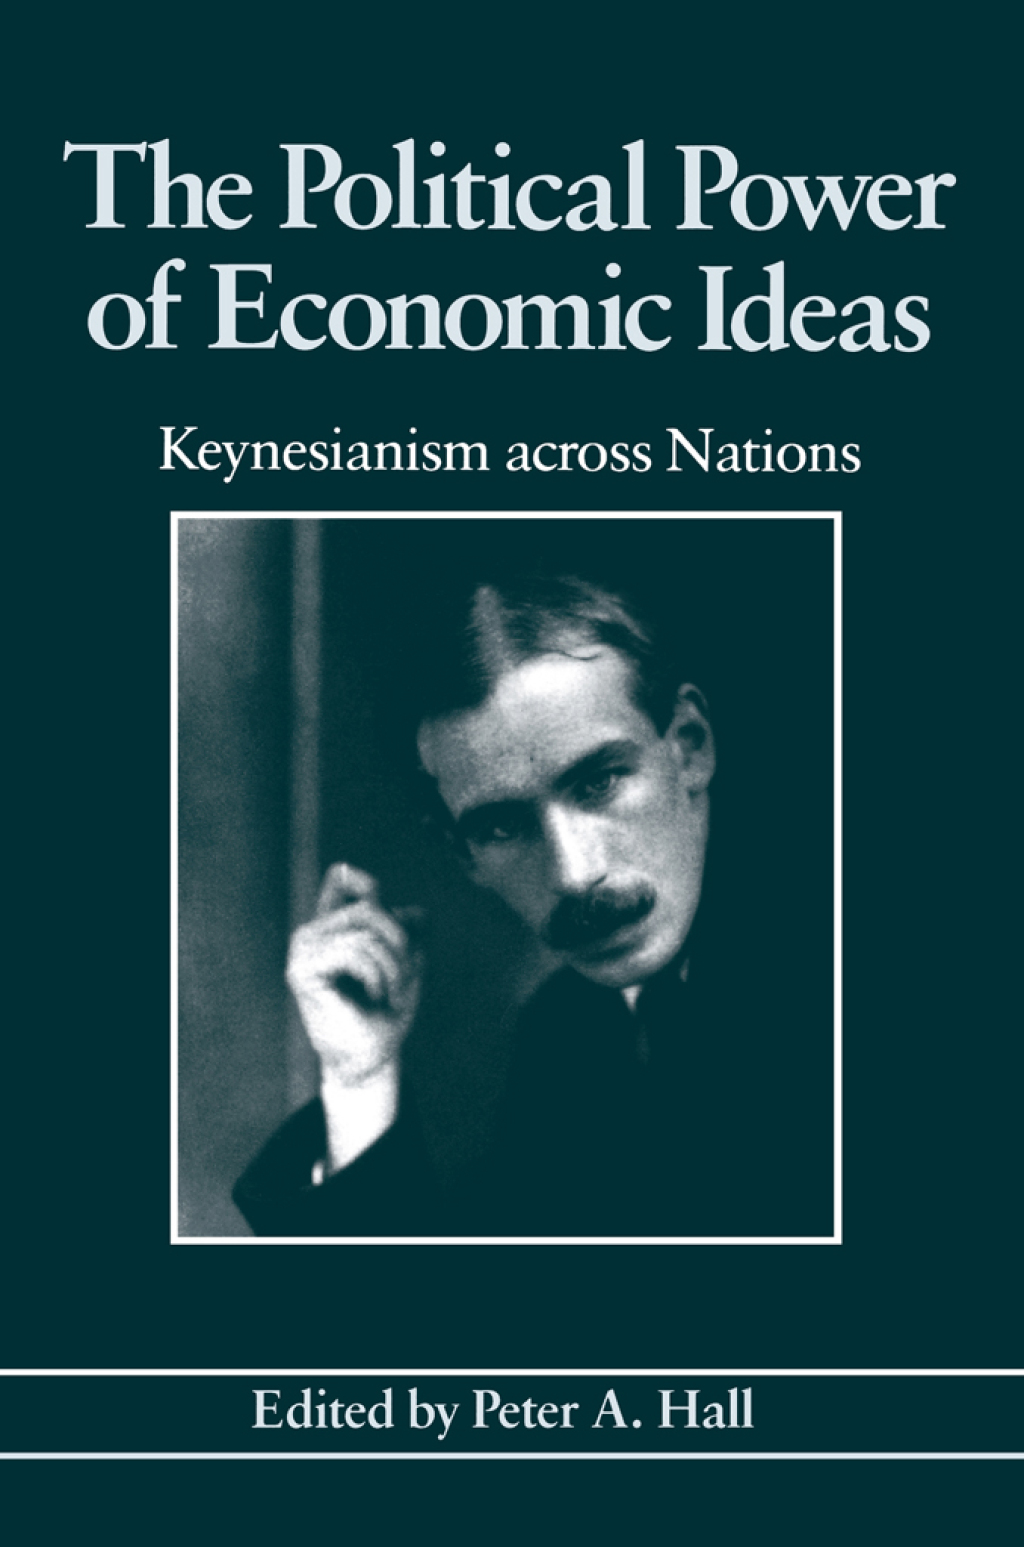 The Political Power of Economic Ideas (eBook) - Peter A. Hall,